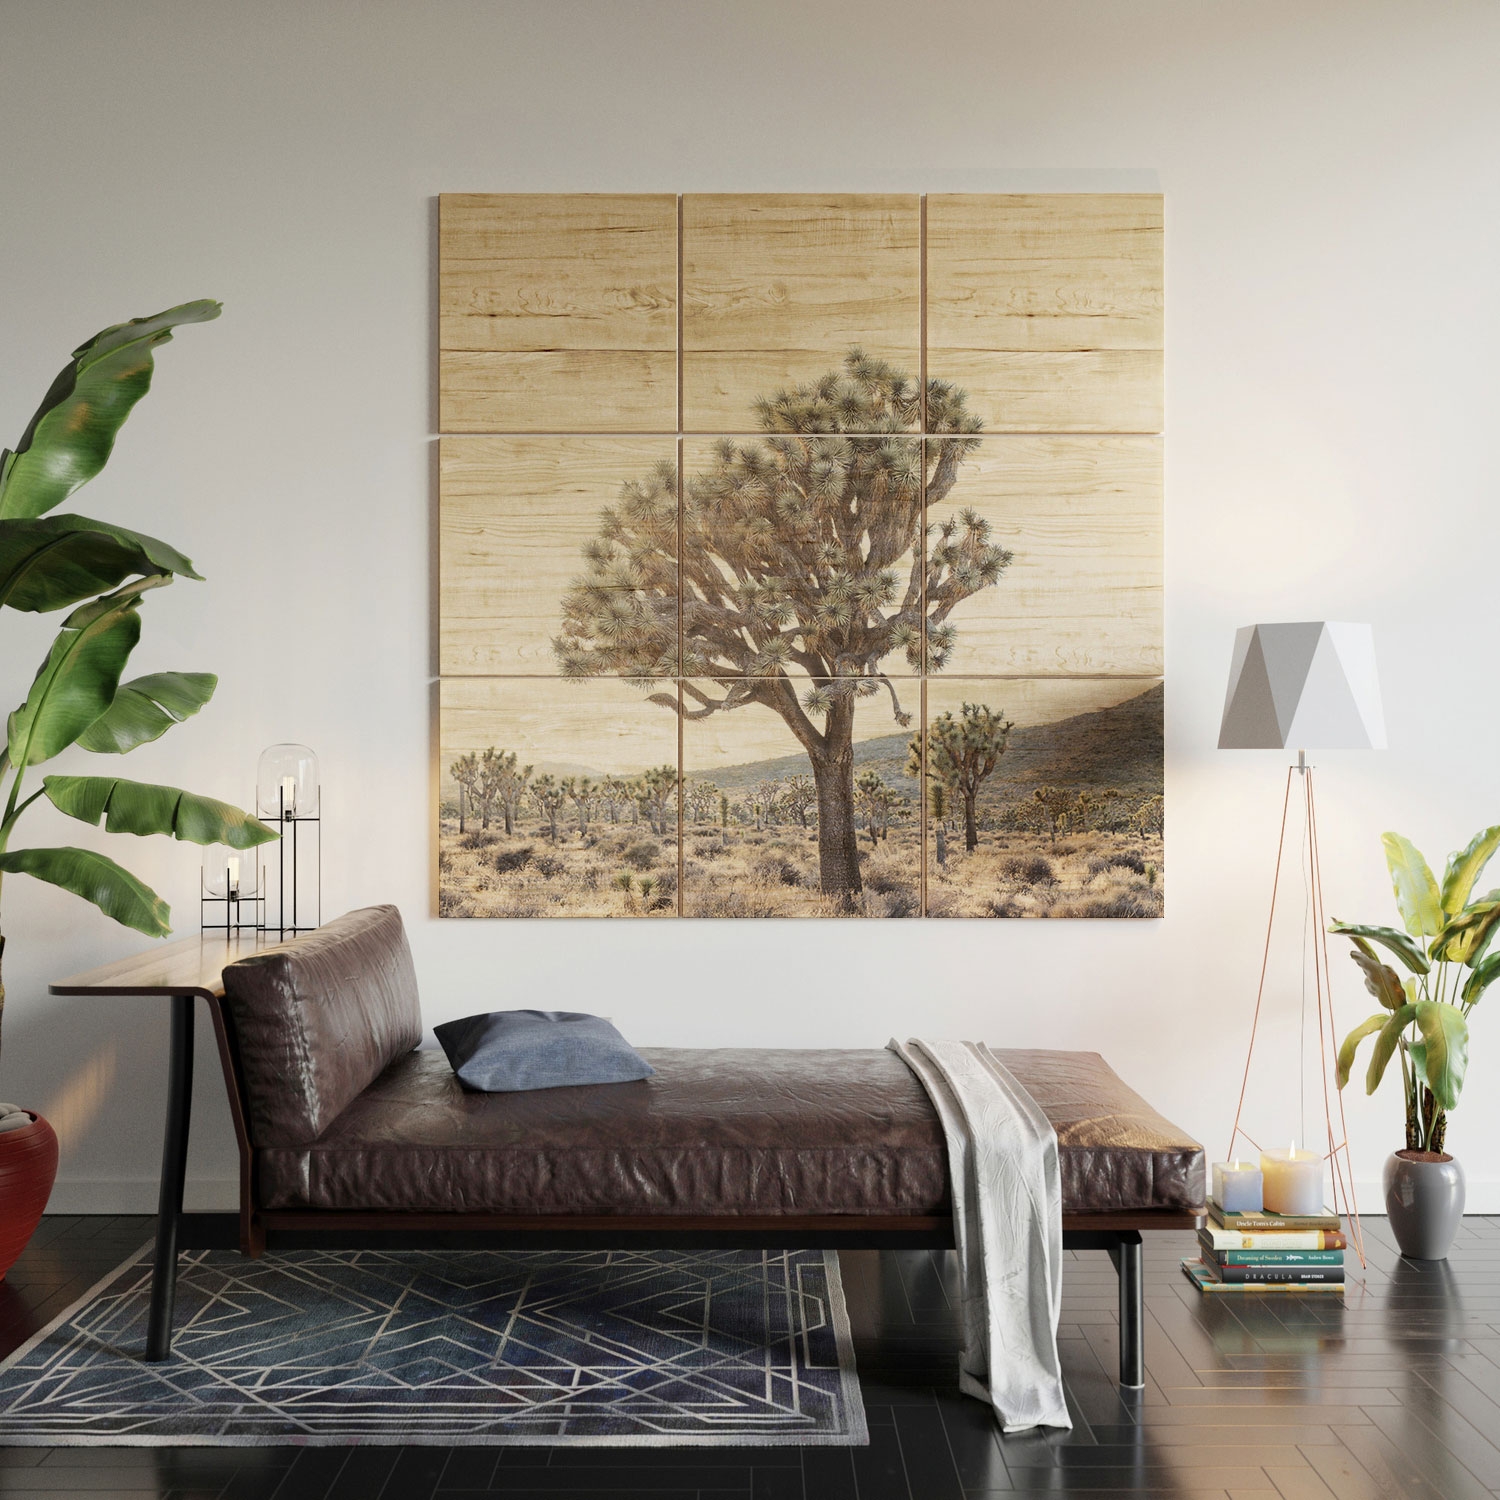 Desert Light by Bree Madden - Wood Wall Mural3' X 3' (Nine 12" Wood Squares) - Image 4